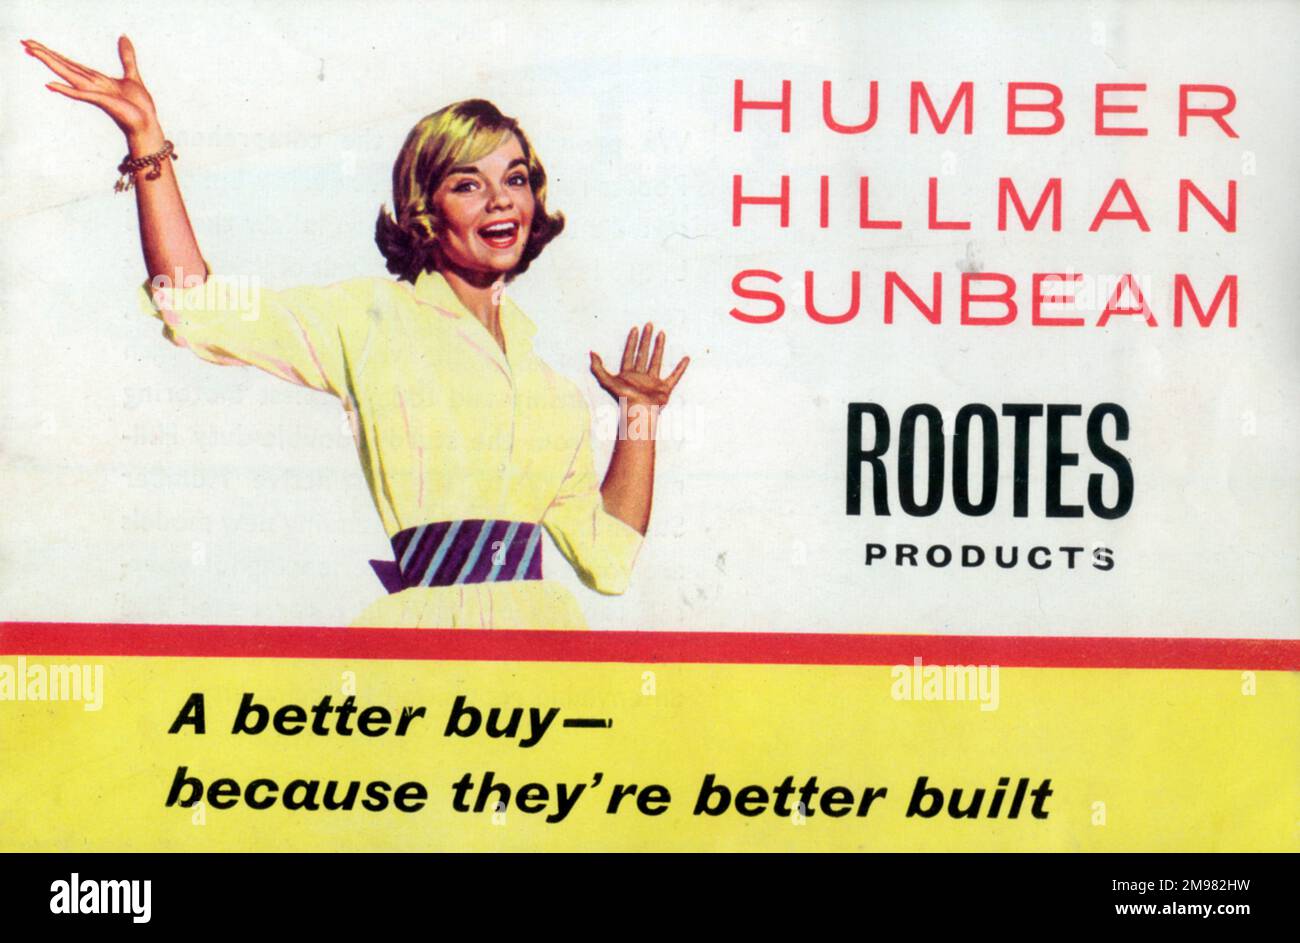 Front cover of a Humber, Hillman and Sunbeam Rootes Motors Limited brochure - 'A Better Buy - because they're better built' Stock Photo